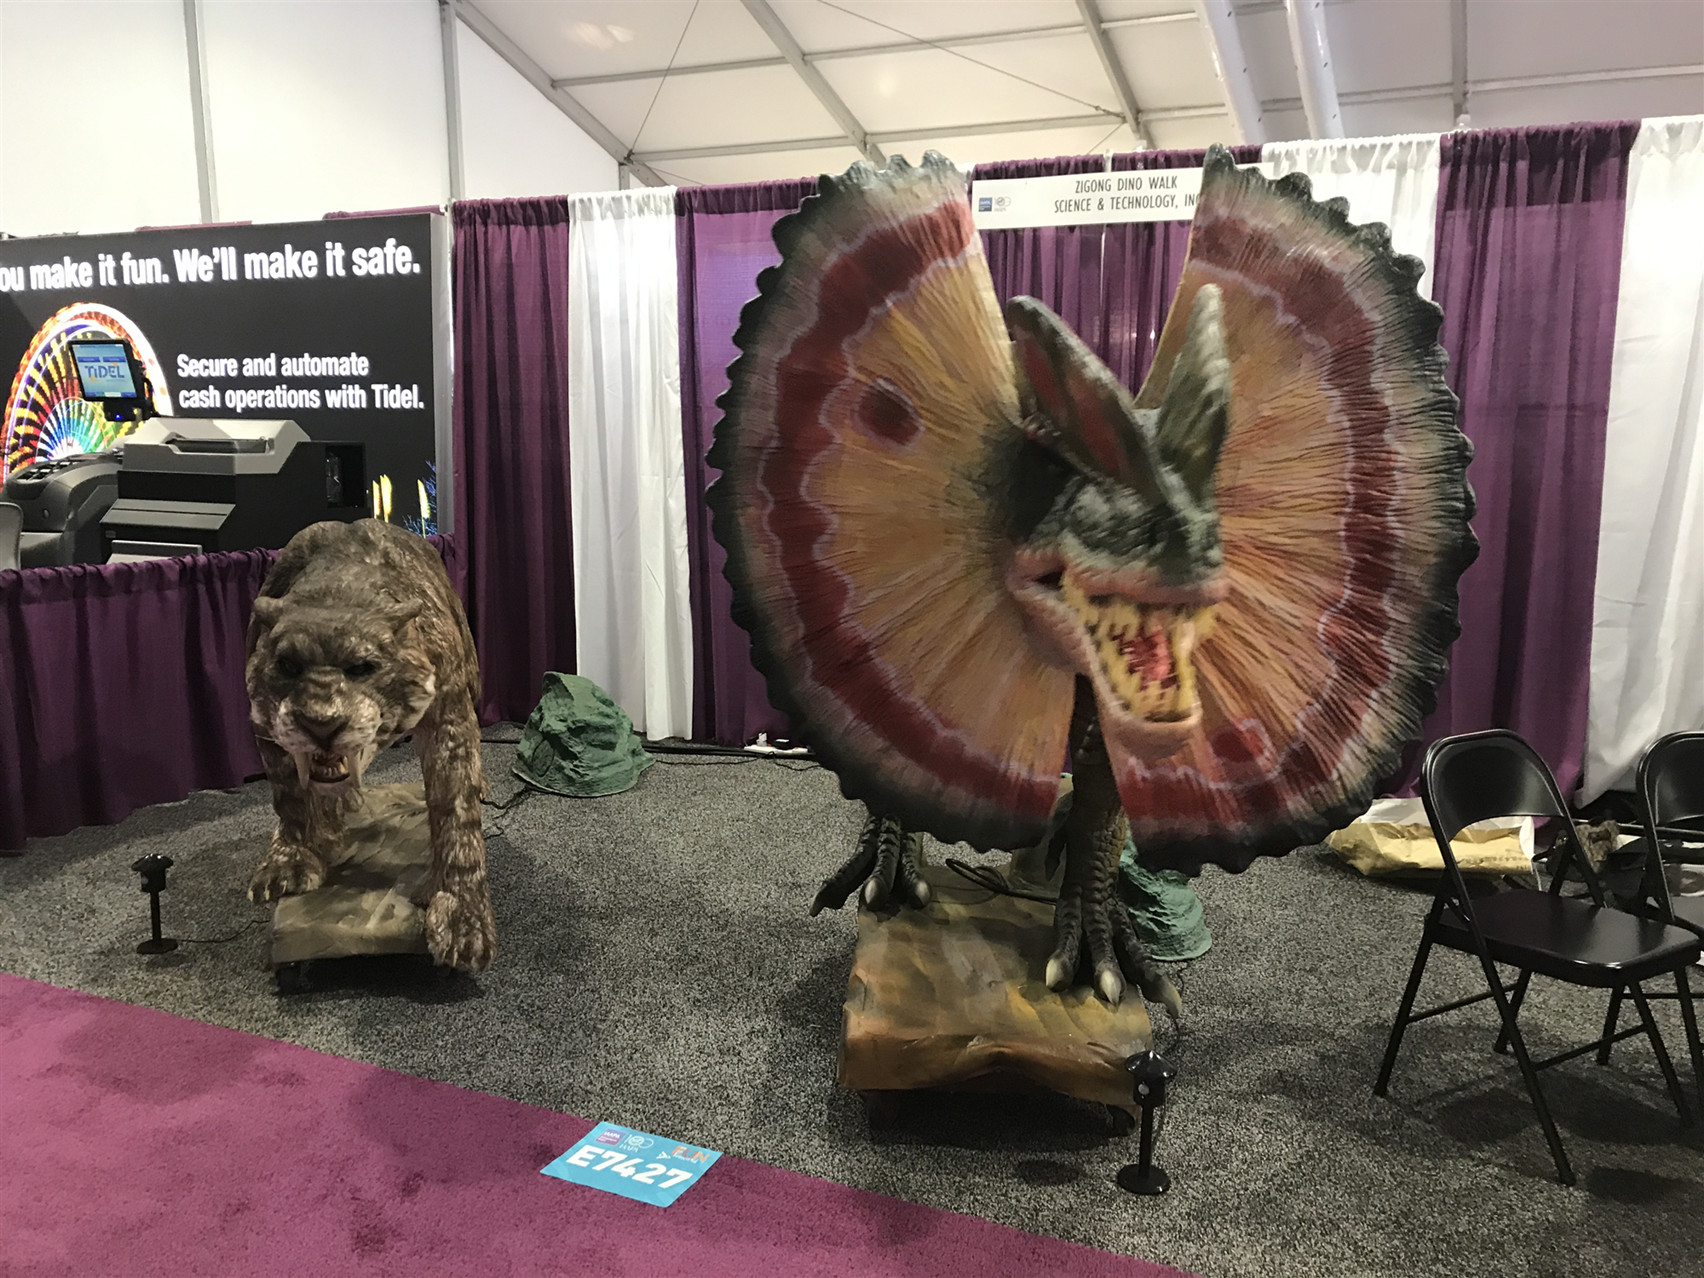 IAAPA Expo North America 2018: A Global Convergence of Industry Professionals